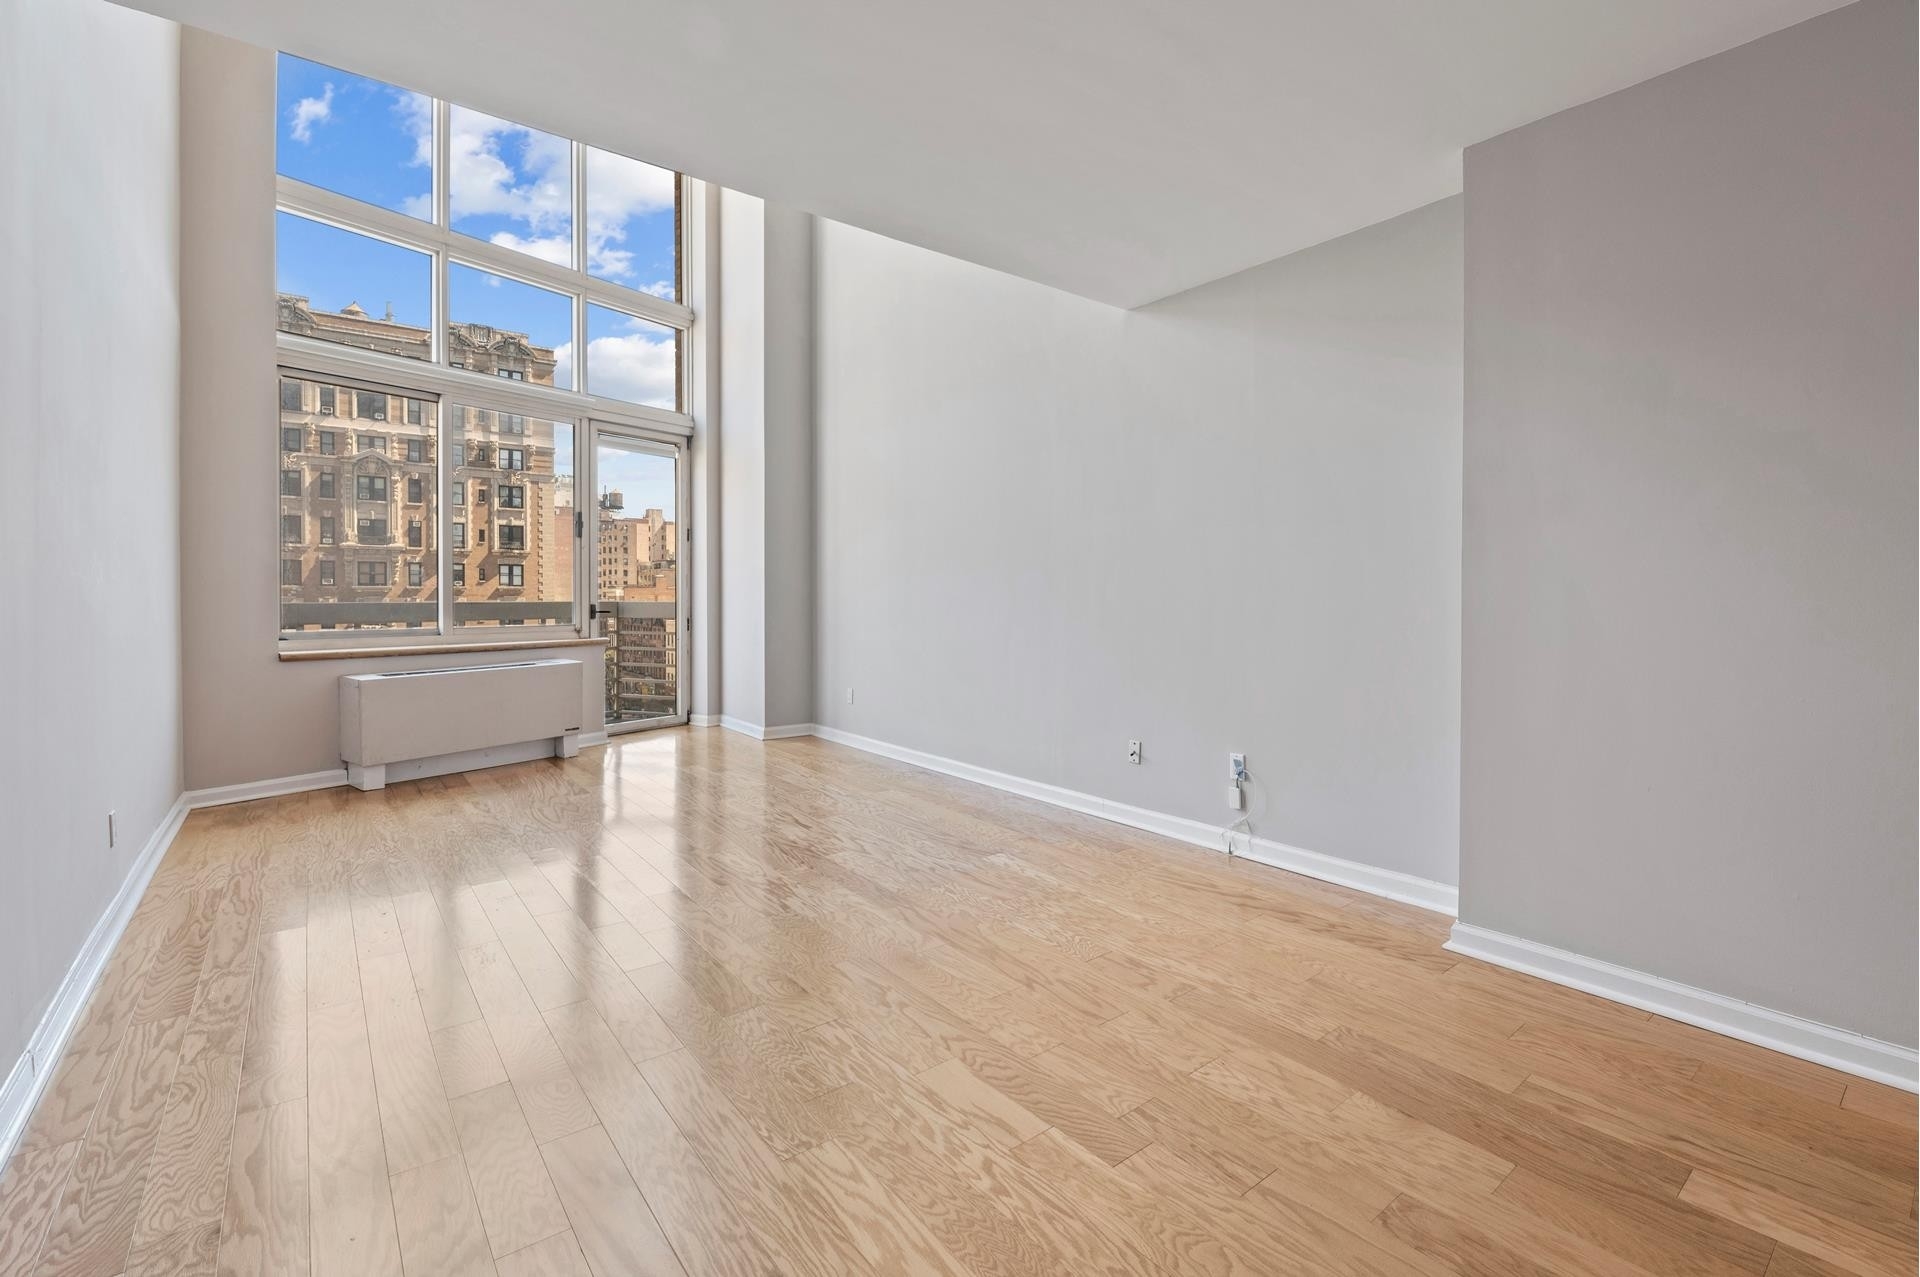 Condominium for Sale at The Alexandria, 201 W 72ND ST, 8N Upper West Side, New York, New York 10023